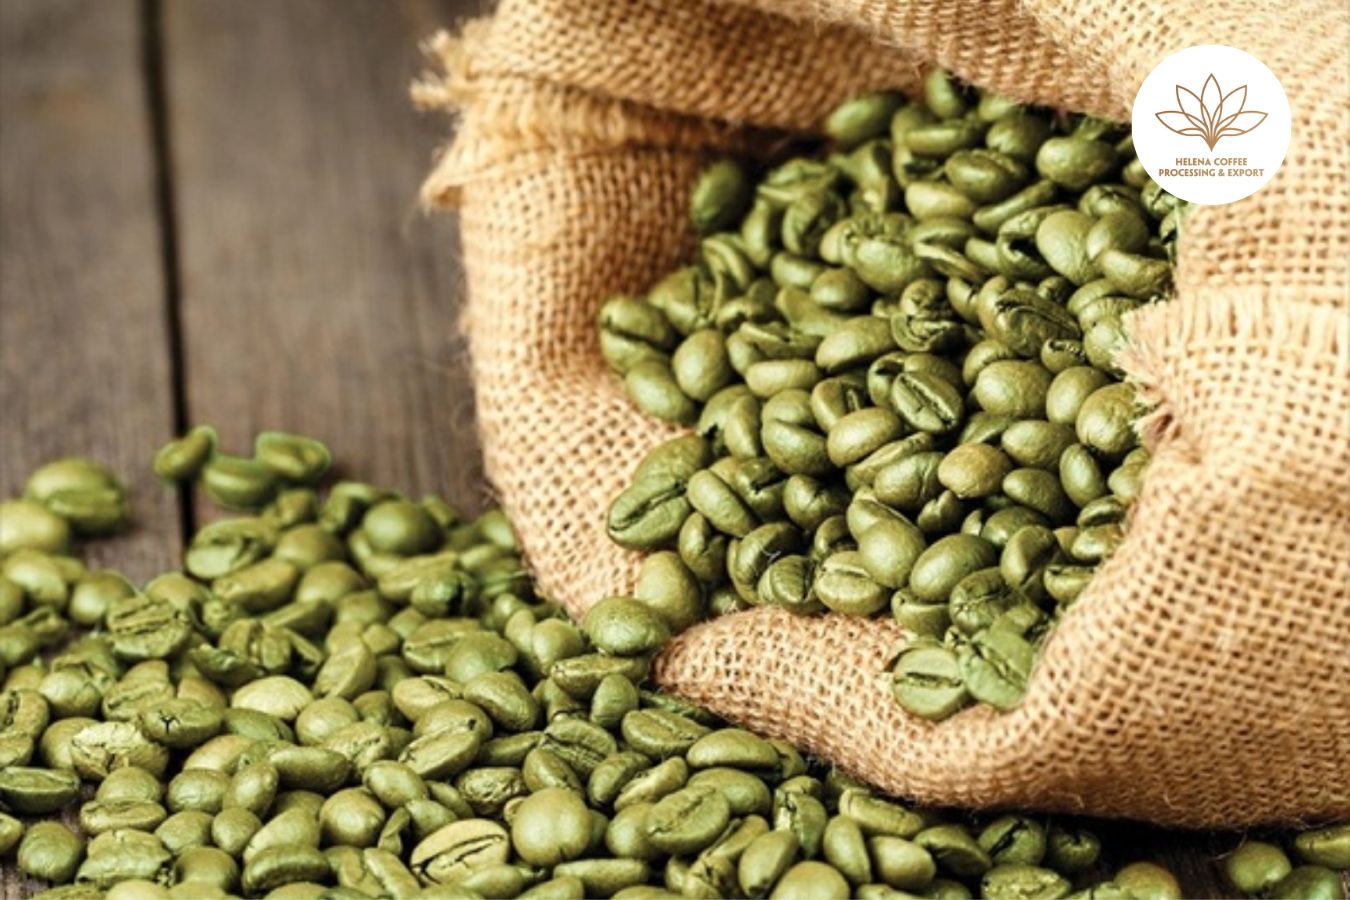 Samples Of Green Coffee Beans: How To Choose And Preserve